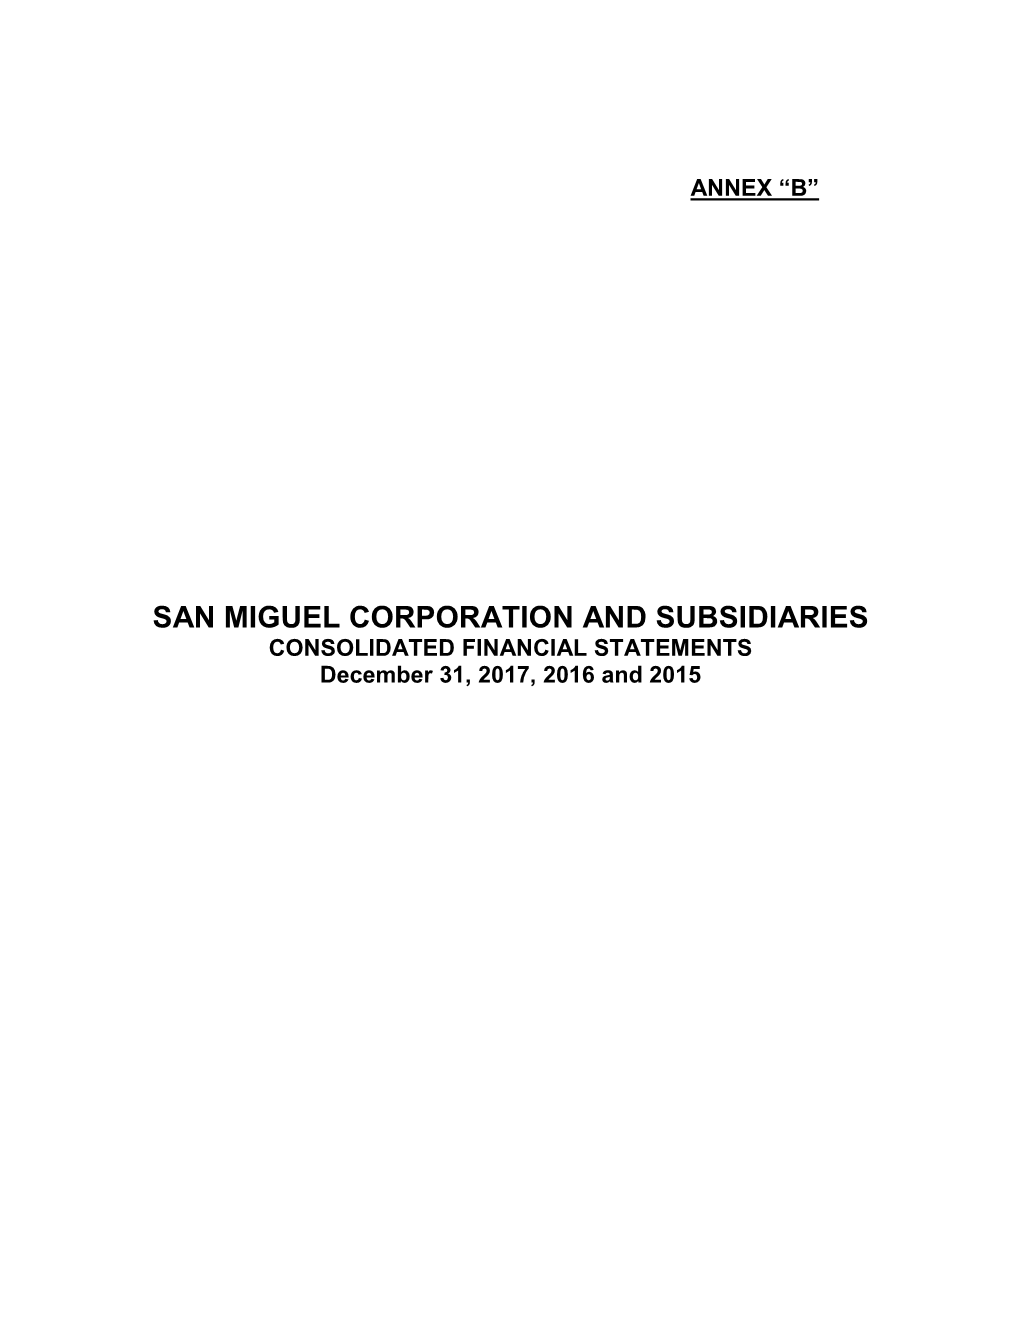 SAN MIGUEL CORPORATION and SUBSIDIARIES CONSOLIDATED FINANCIAL STATEMENTS December 31, 2017, 2016 and 2015 (151Srru>E \81 San MIGUEL CORPORATION @